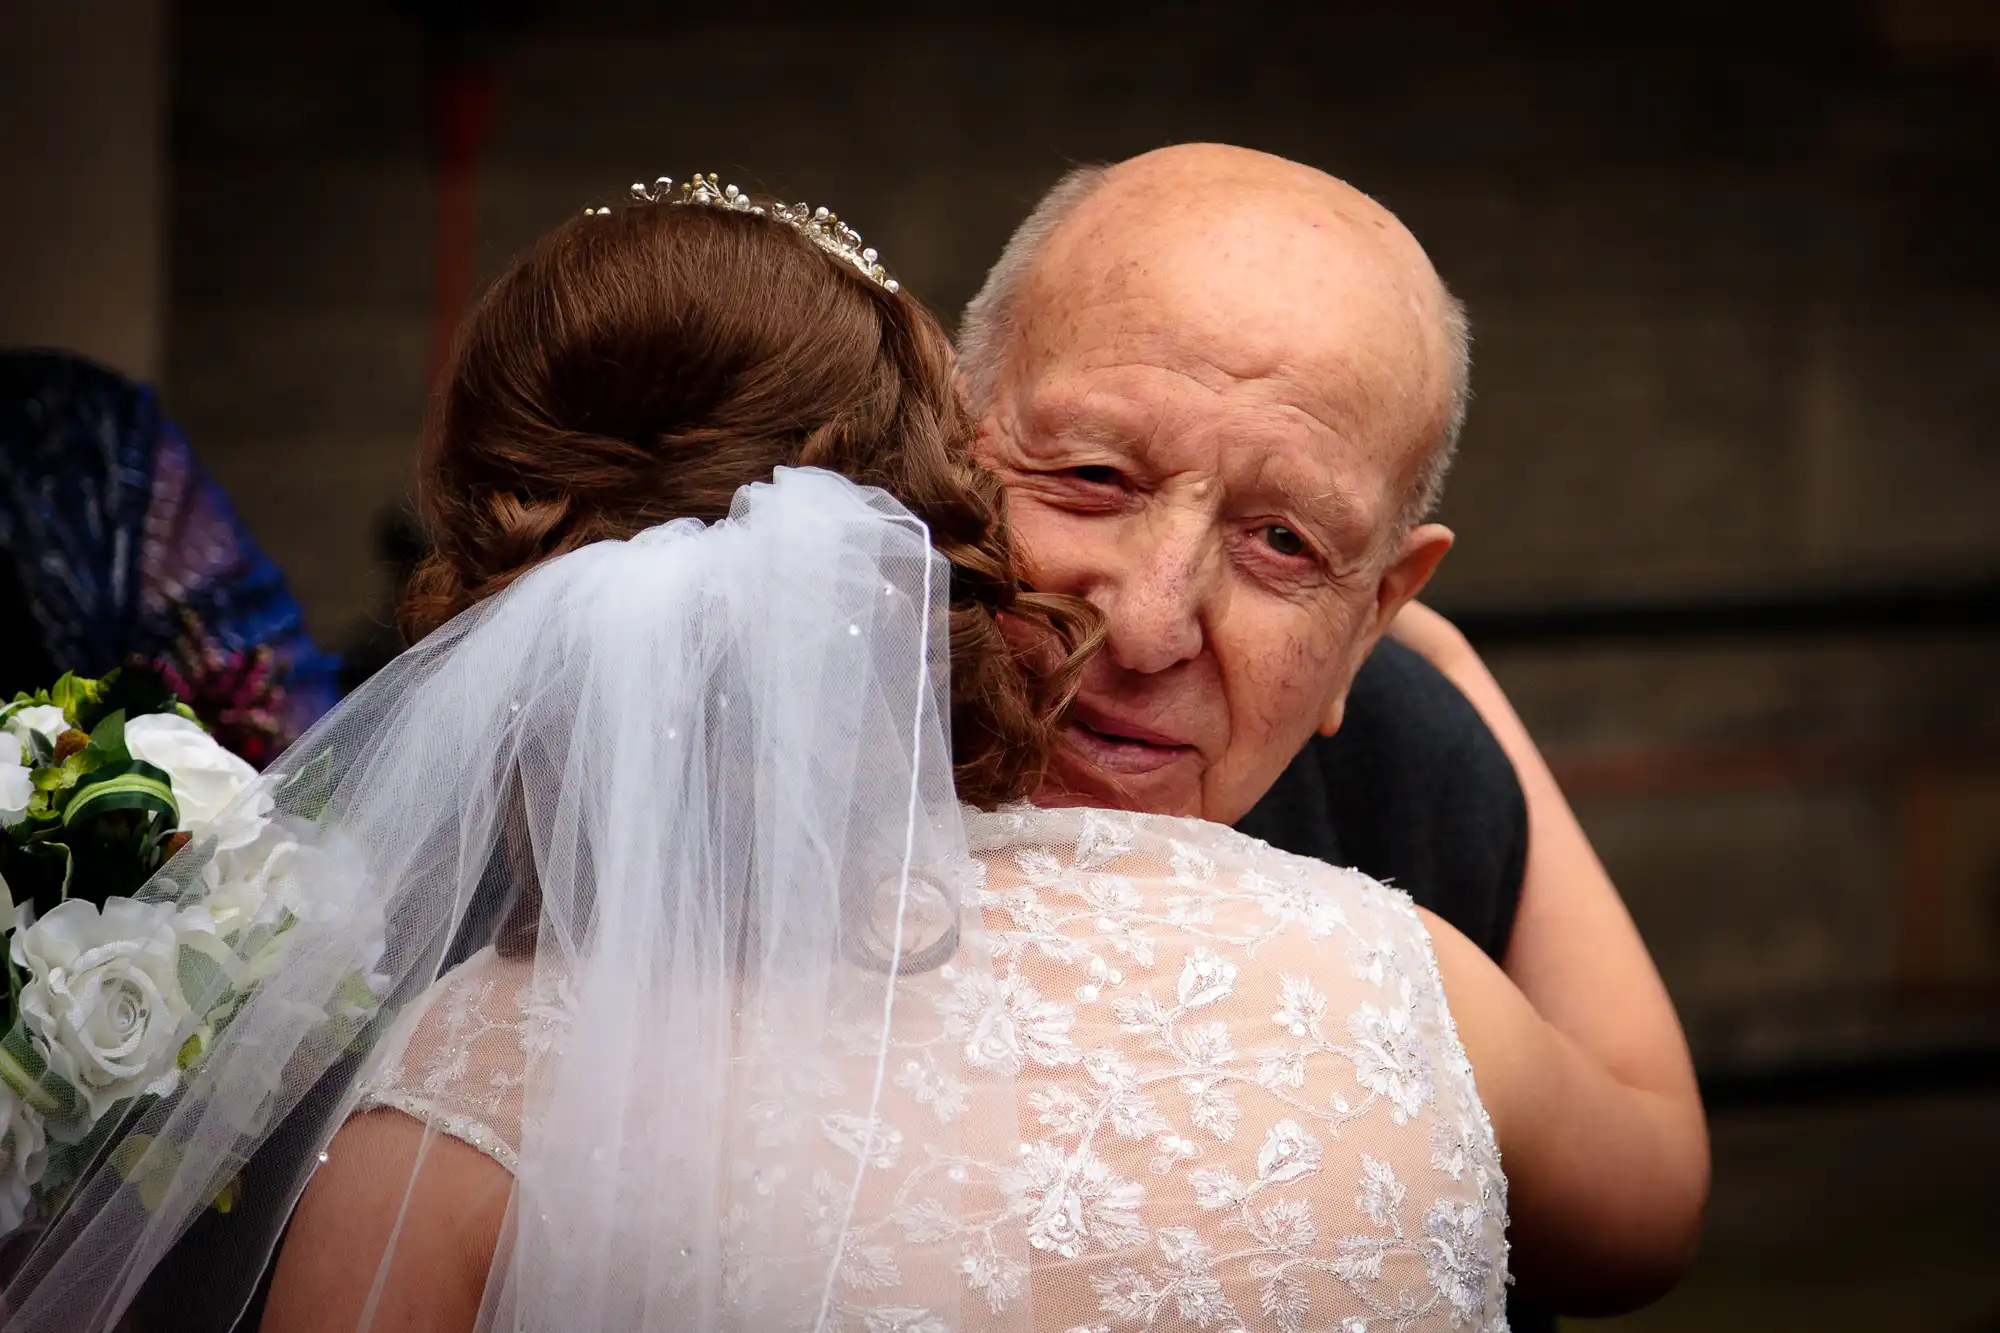 Elderly man emotionally embracing a bride in a lace wedding dress and veil, holding a bouquet, in an outdoor setting.